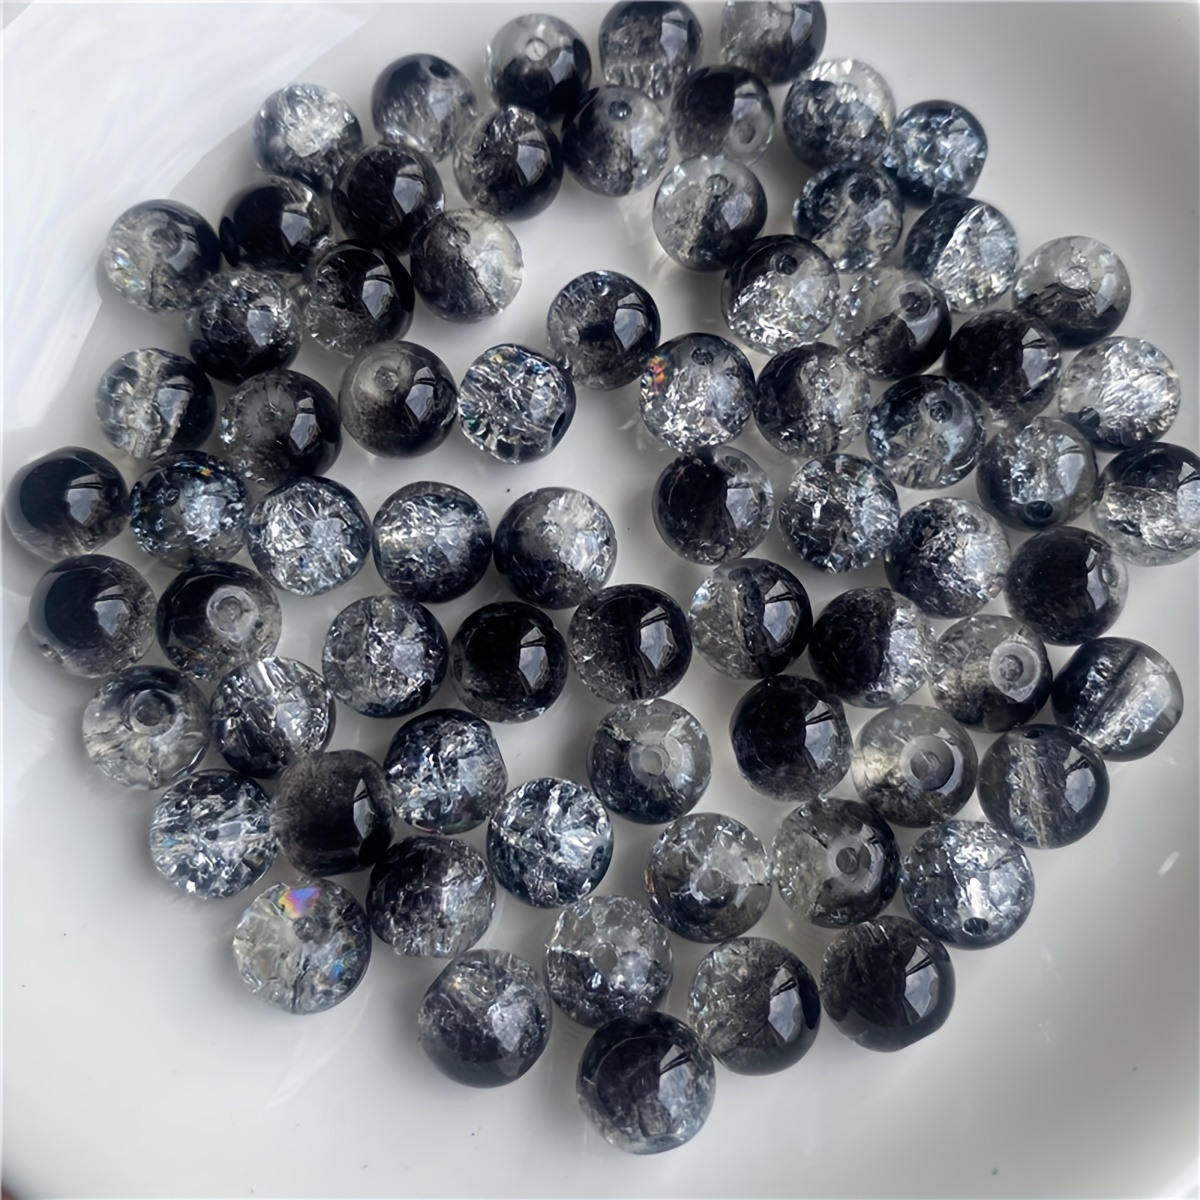 200-1000pcs 2/3/4mm Czech Glass Seed Beads Black White Loose Spacer Beads  For Diy Bracelet Necklace Small Business Jewelry Making Craft Supplies